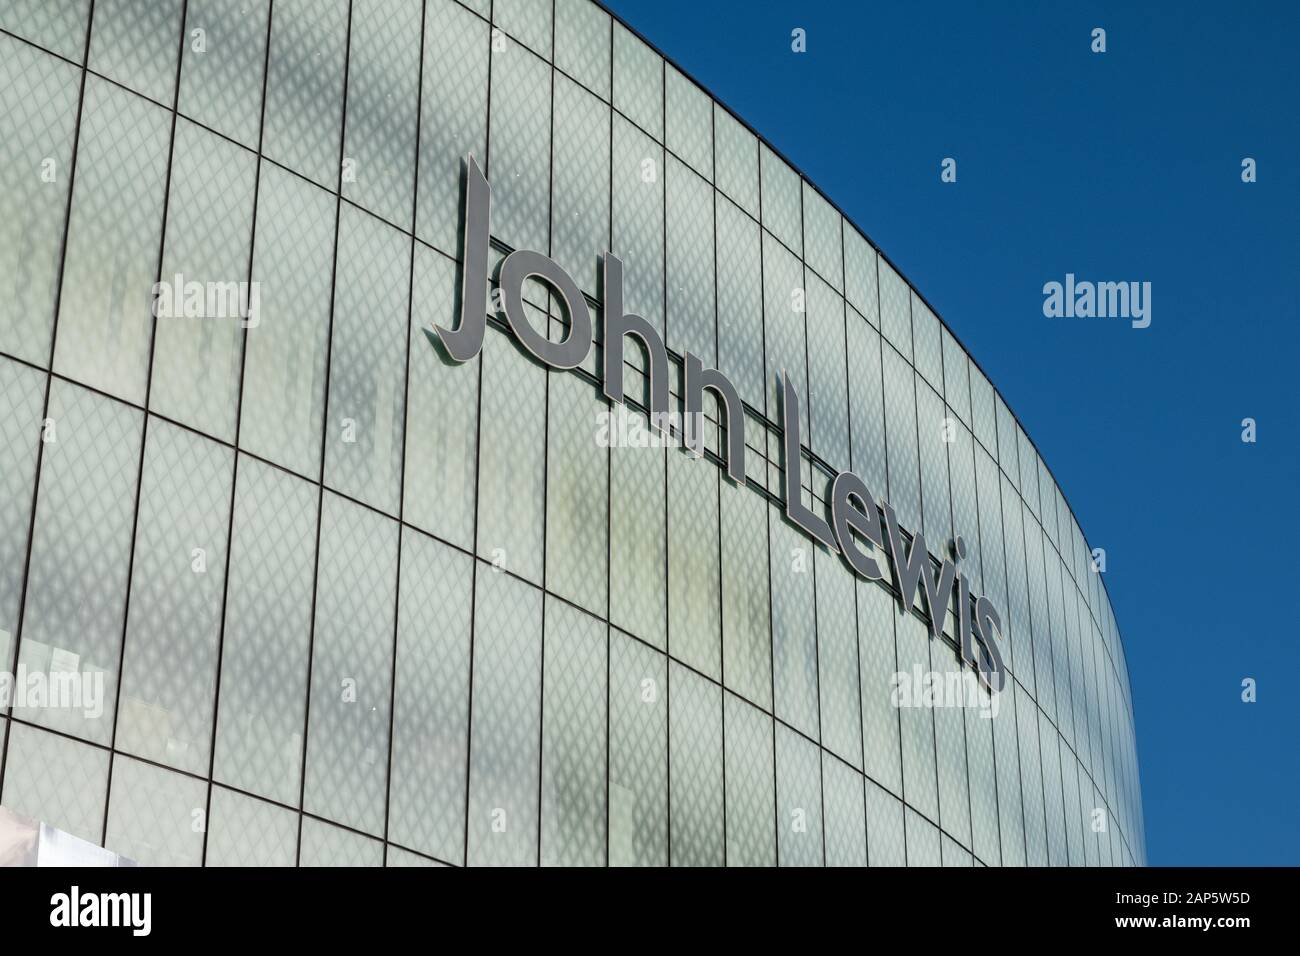 The John Lewis building in Grand Central above Birmingham New Street Station in Birmingham,West Midlands, UK Stock Photo